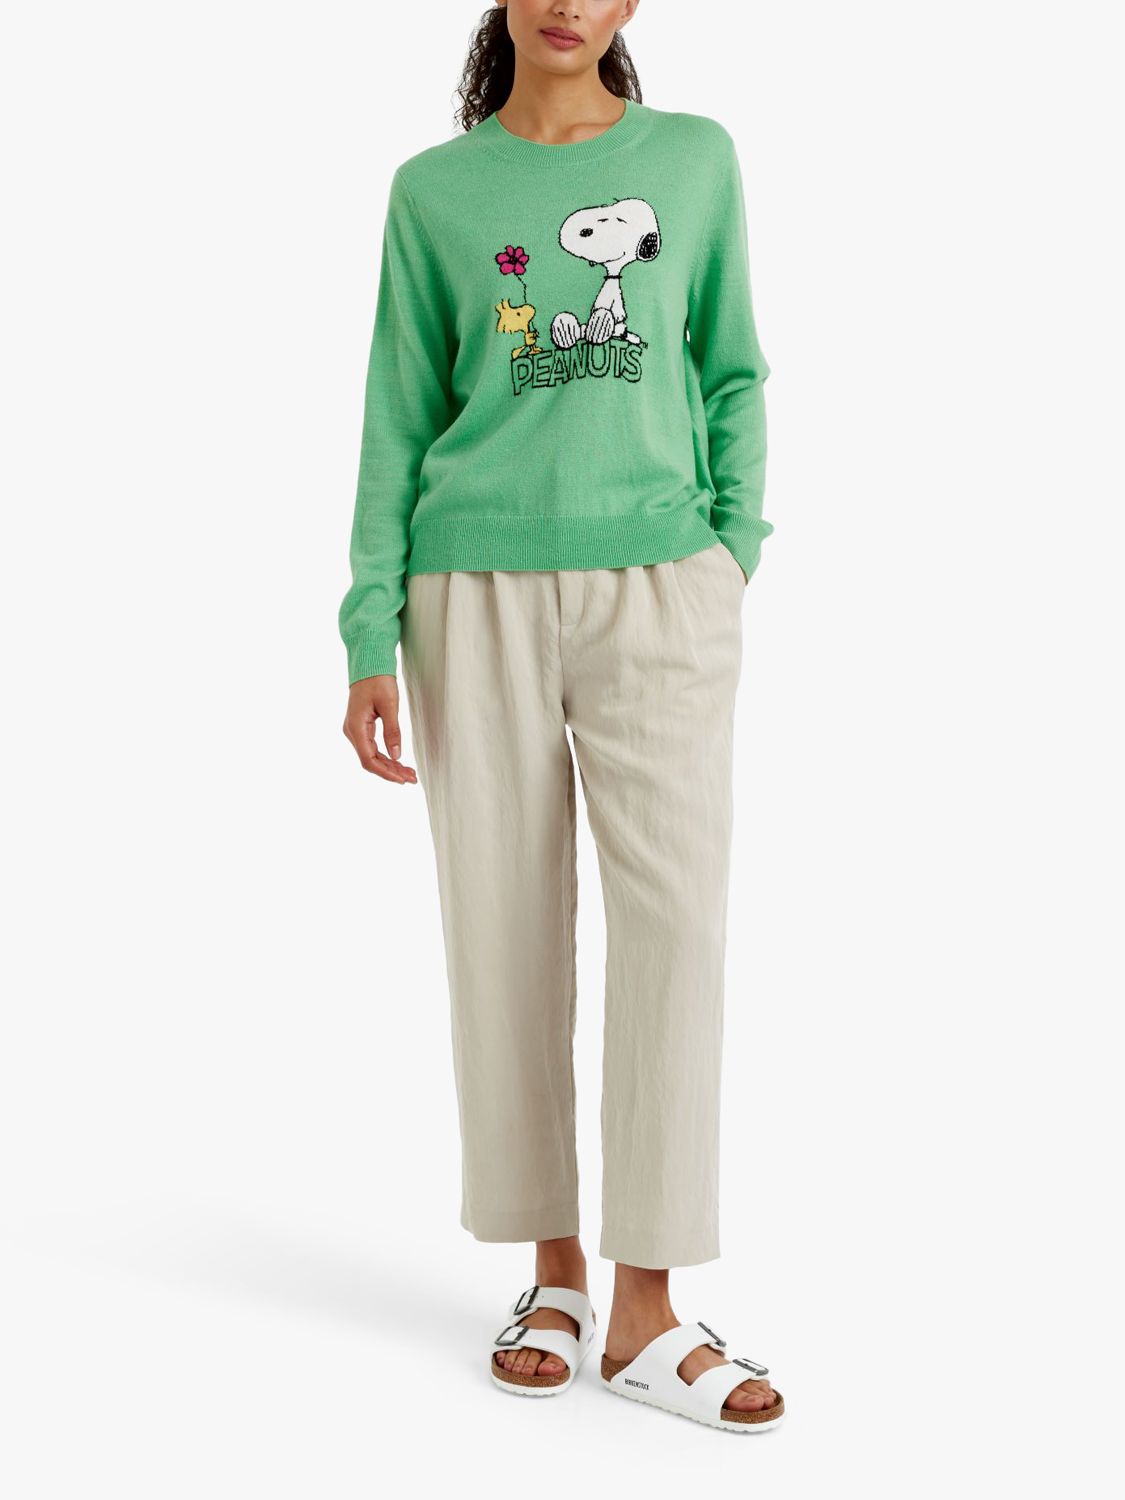 Buy Chinti & Parker Peanuts Wool Cashmere Blend Jumper Online at johnlewis.com